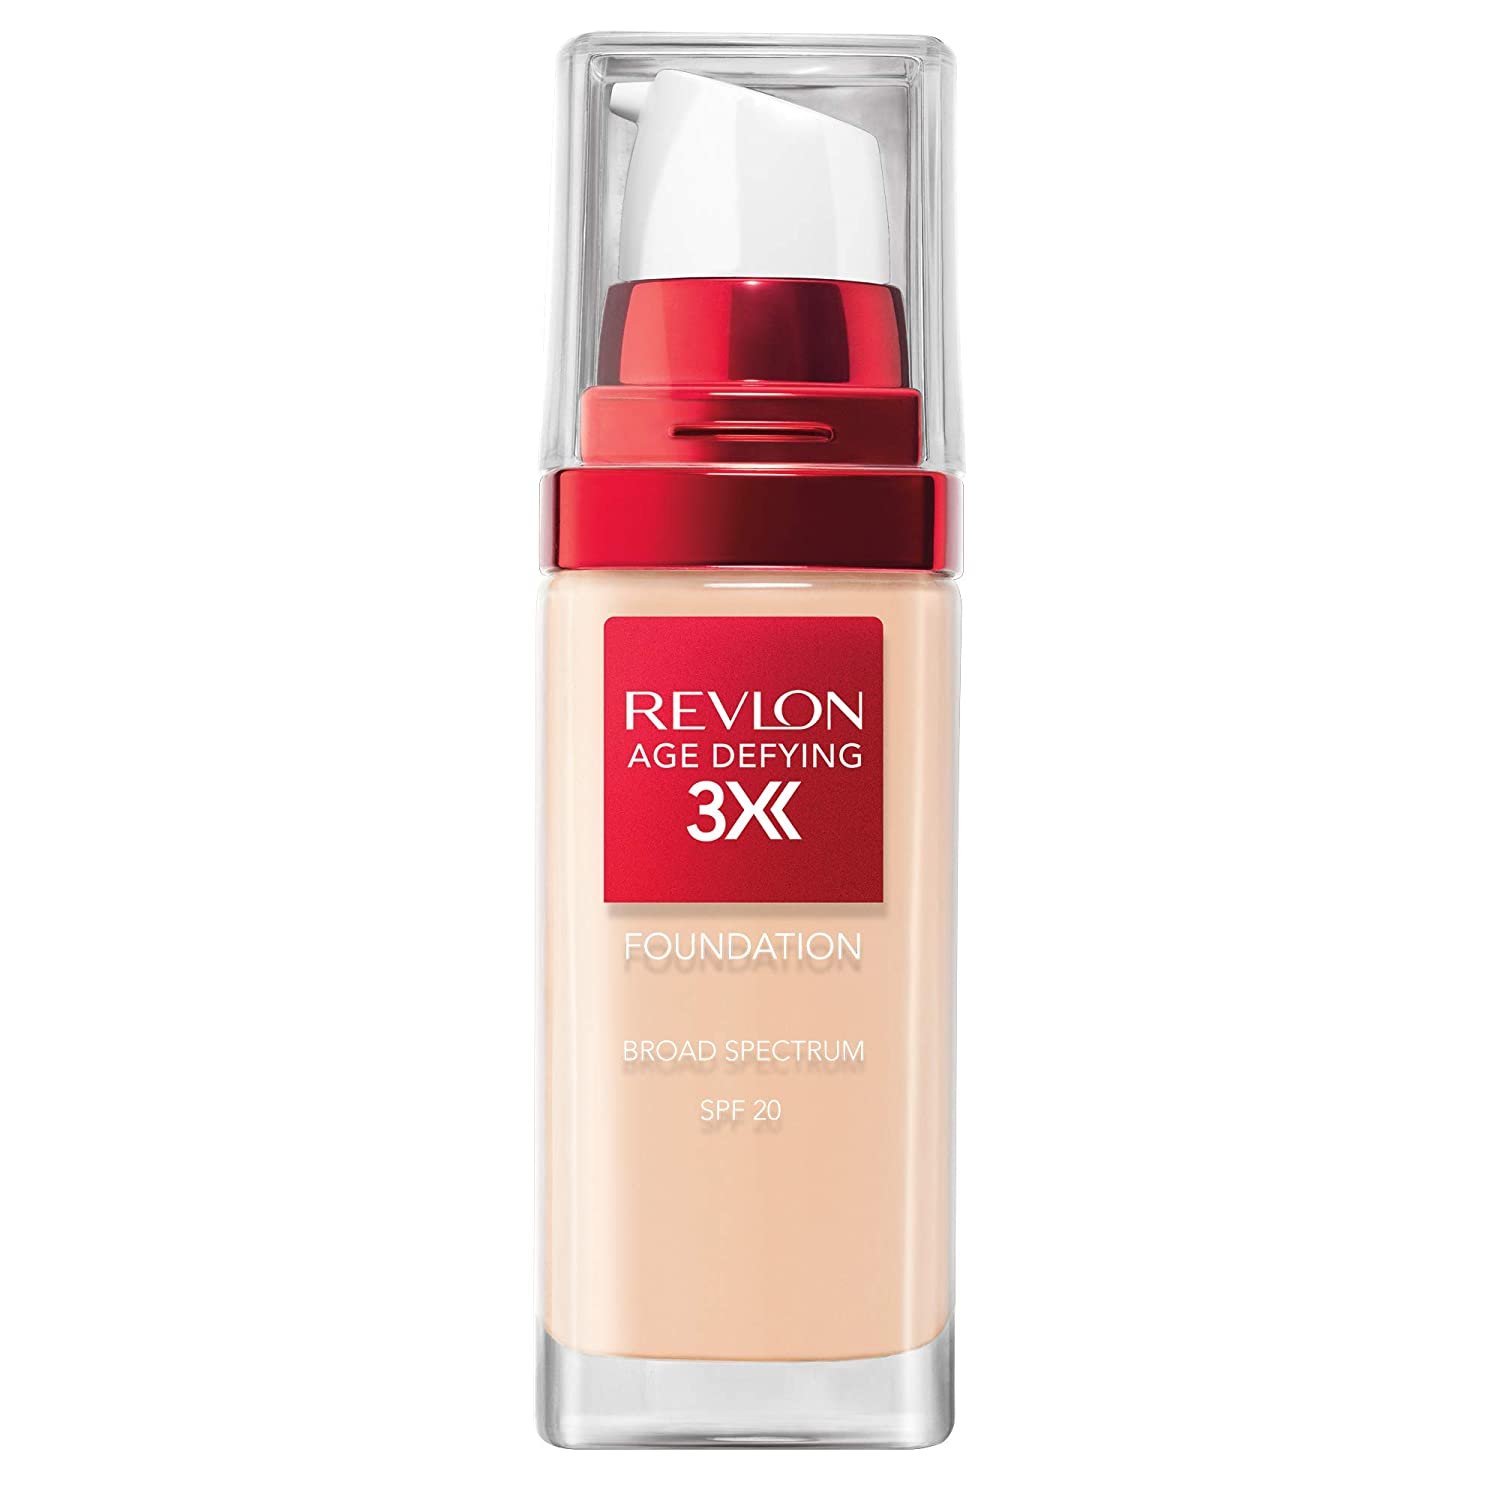 Revlon Age Defying Firming and Lifting Makeup, Fresh Ivory, 1 Count - image 1 of 5